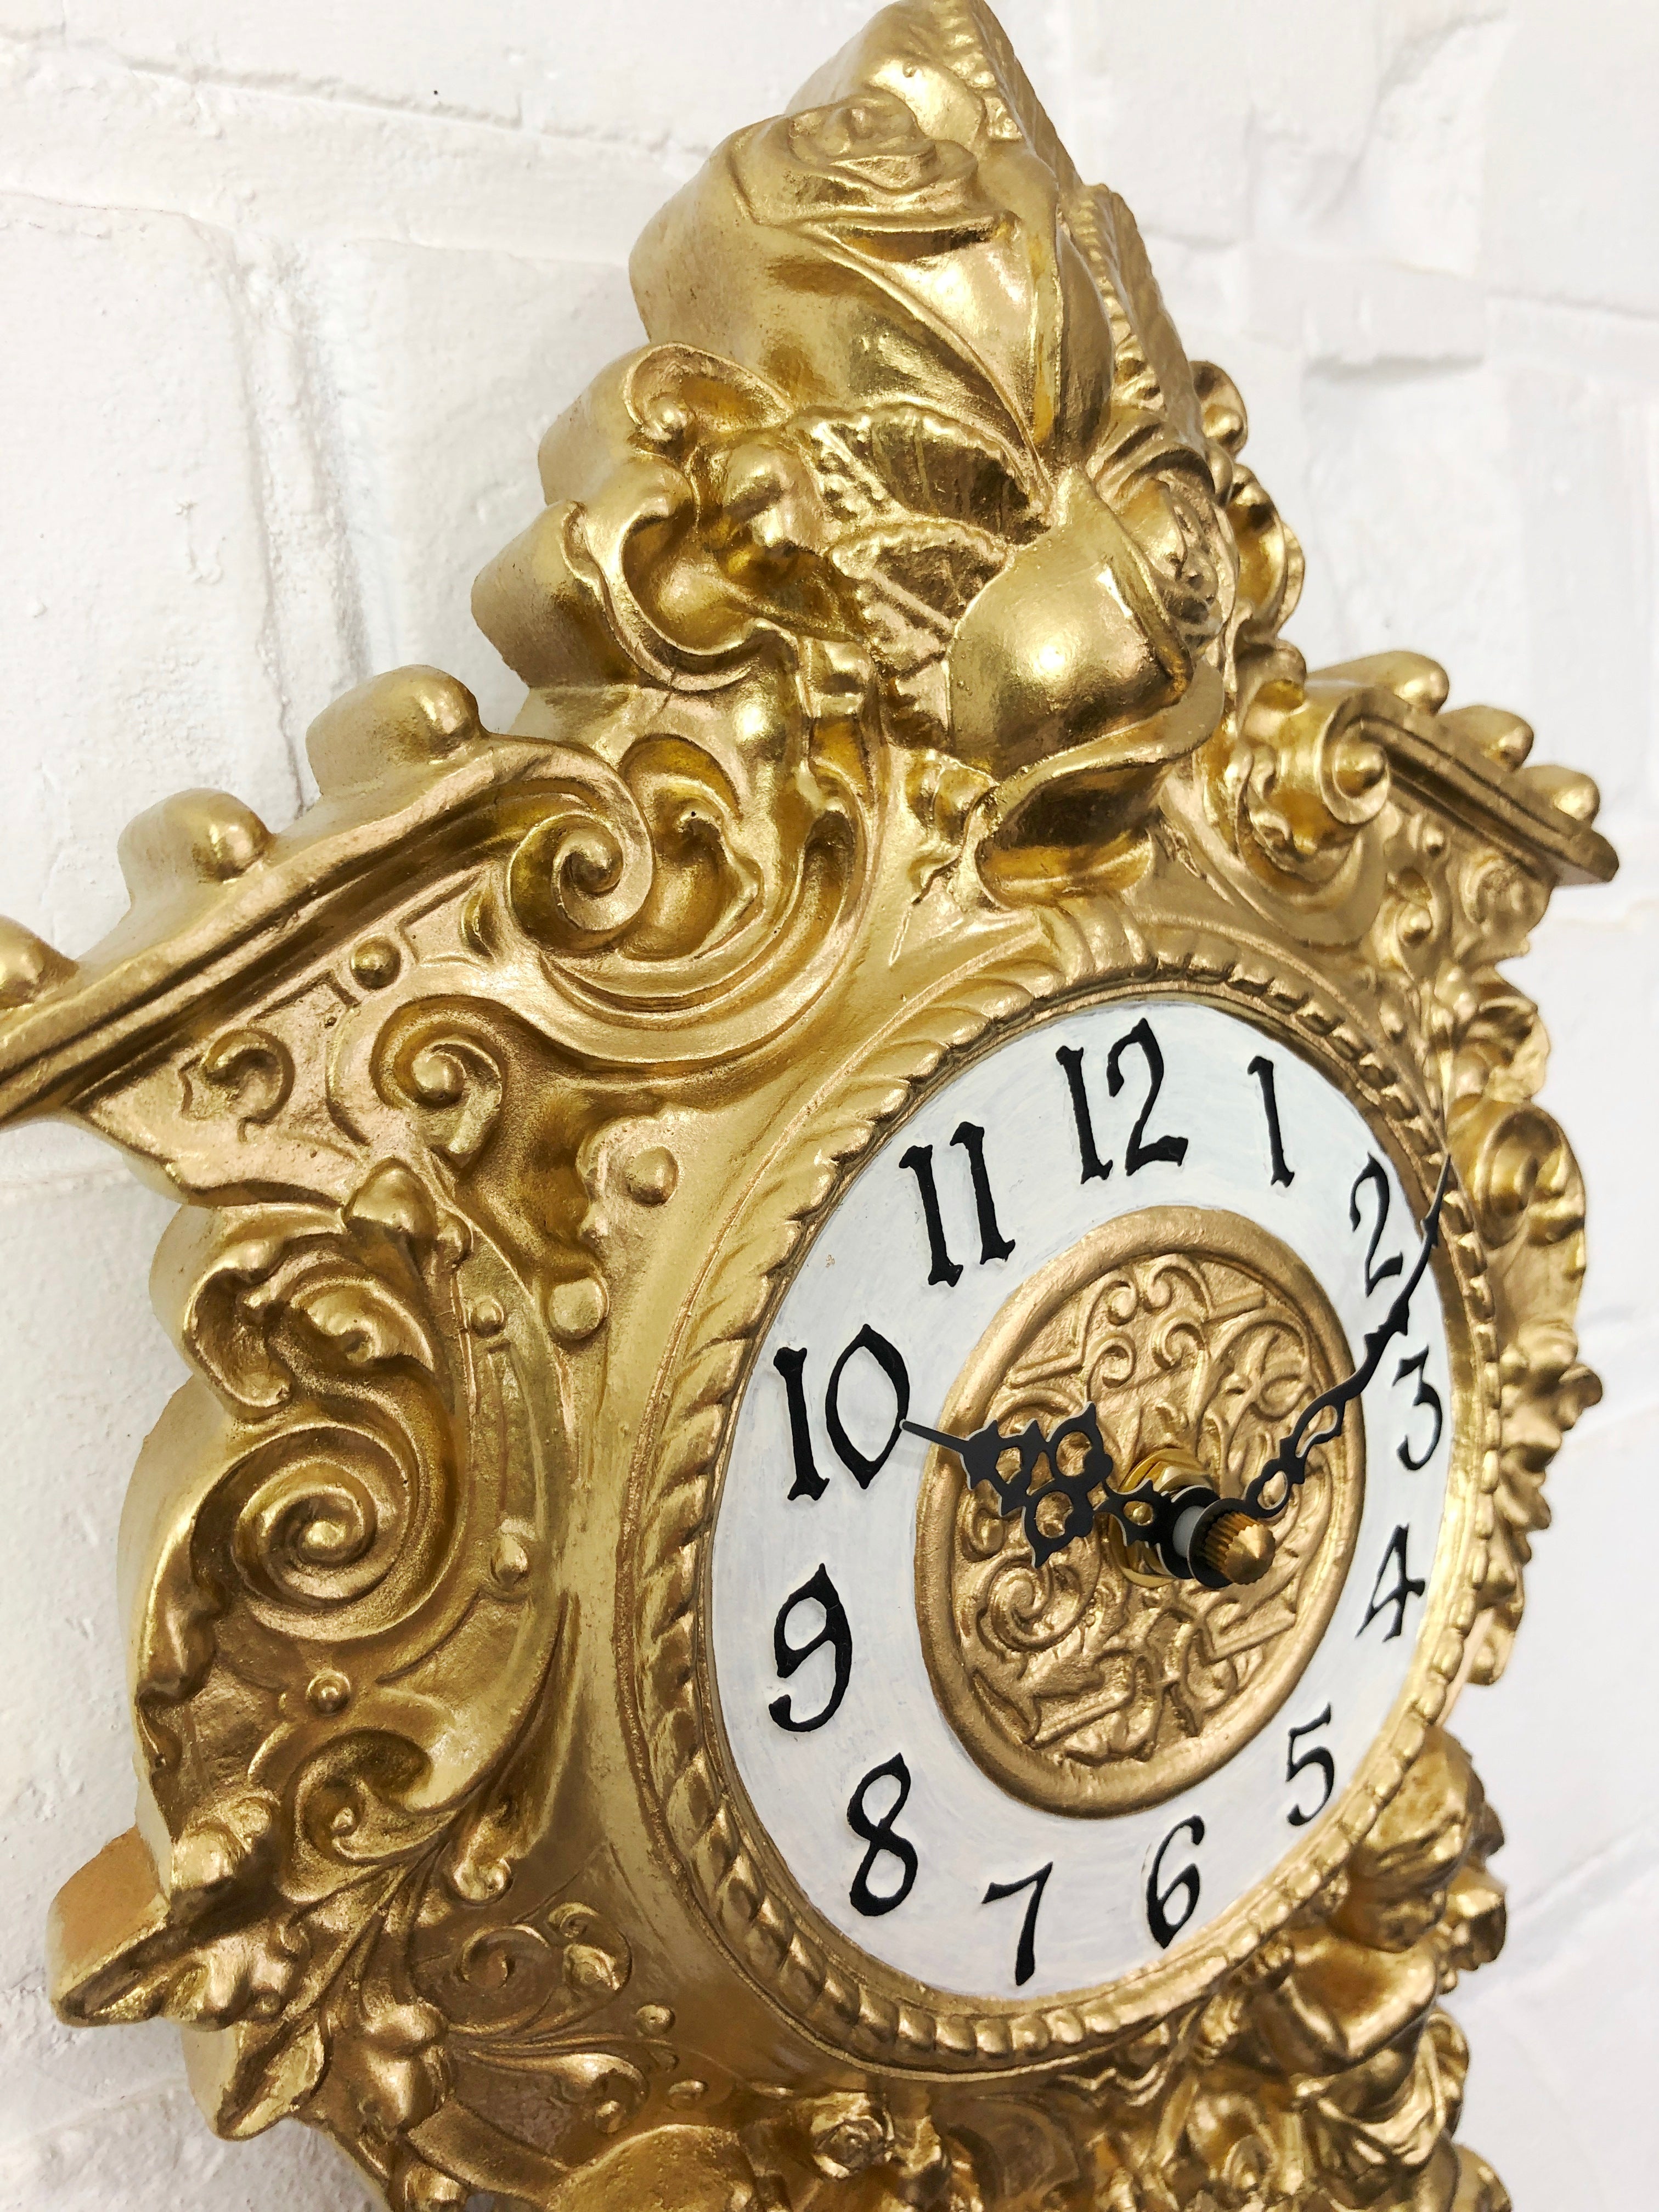 Vintage Figural Cherub Angel Ornate Gold Battery Wall Clock | eXibit collection